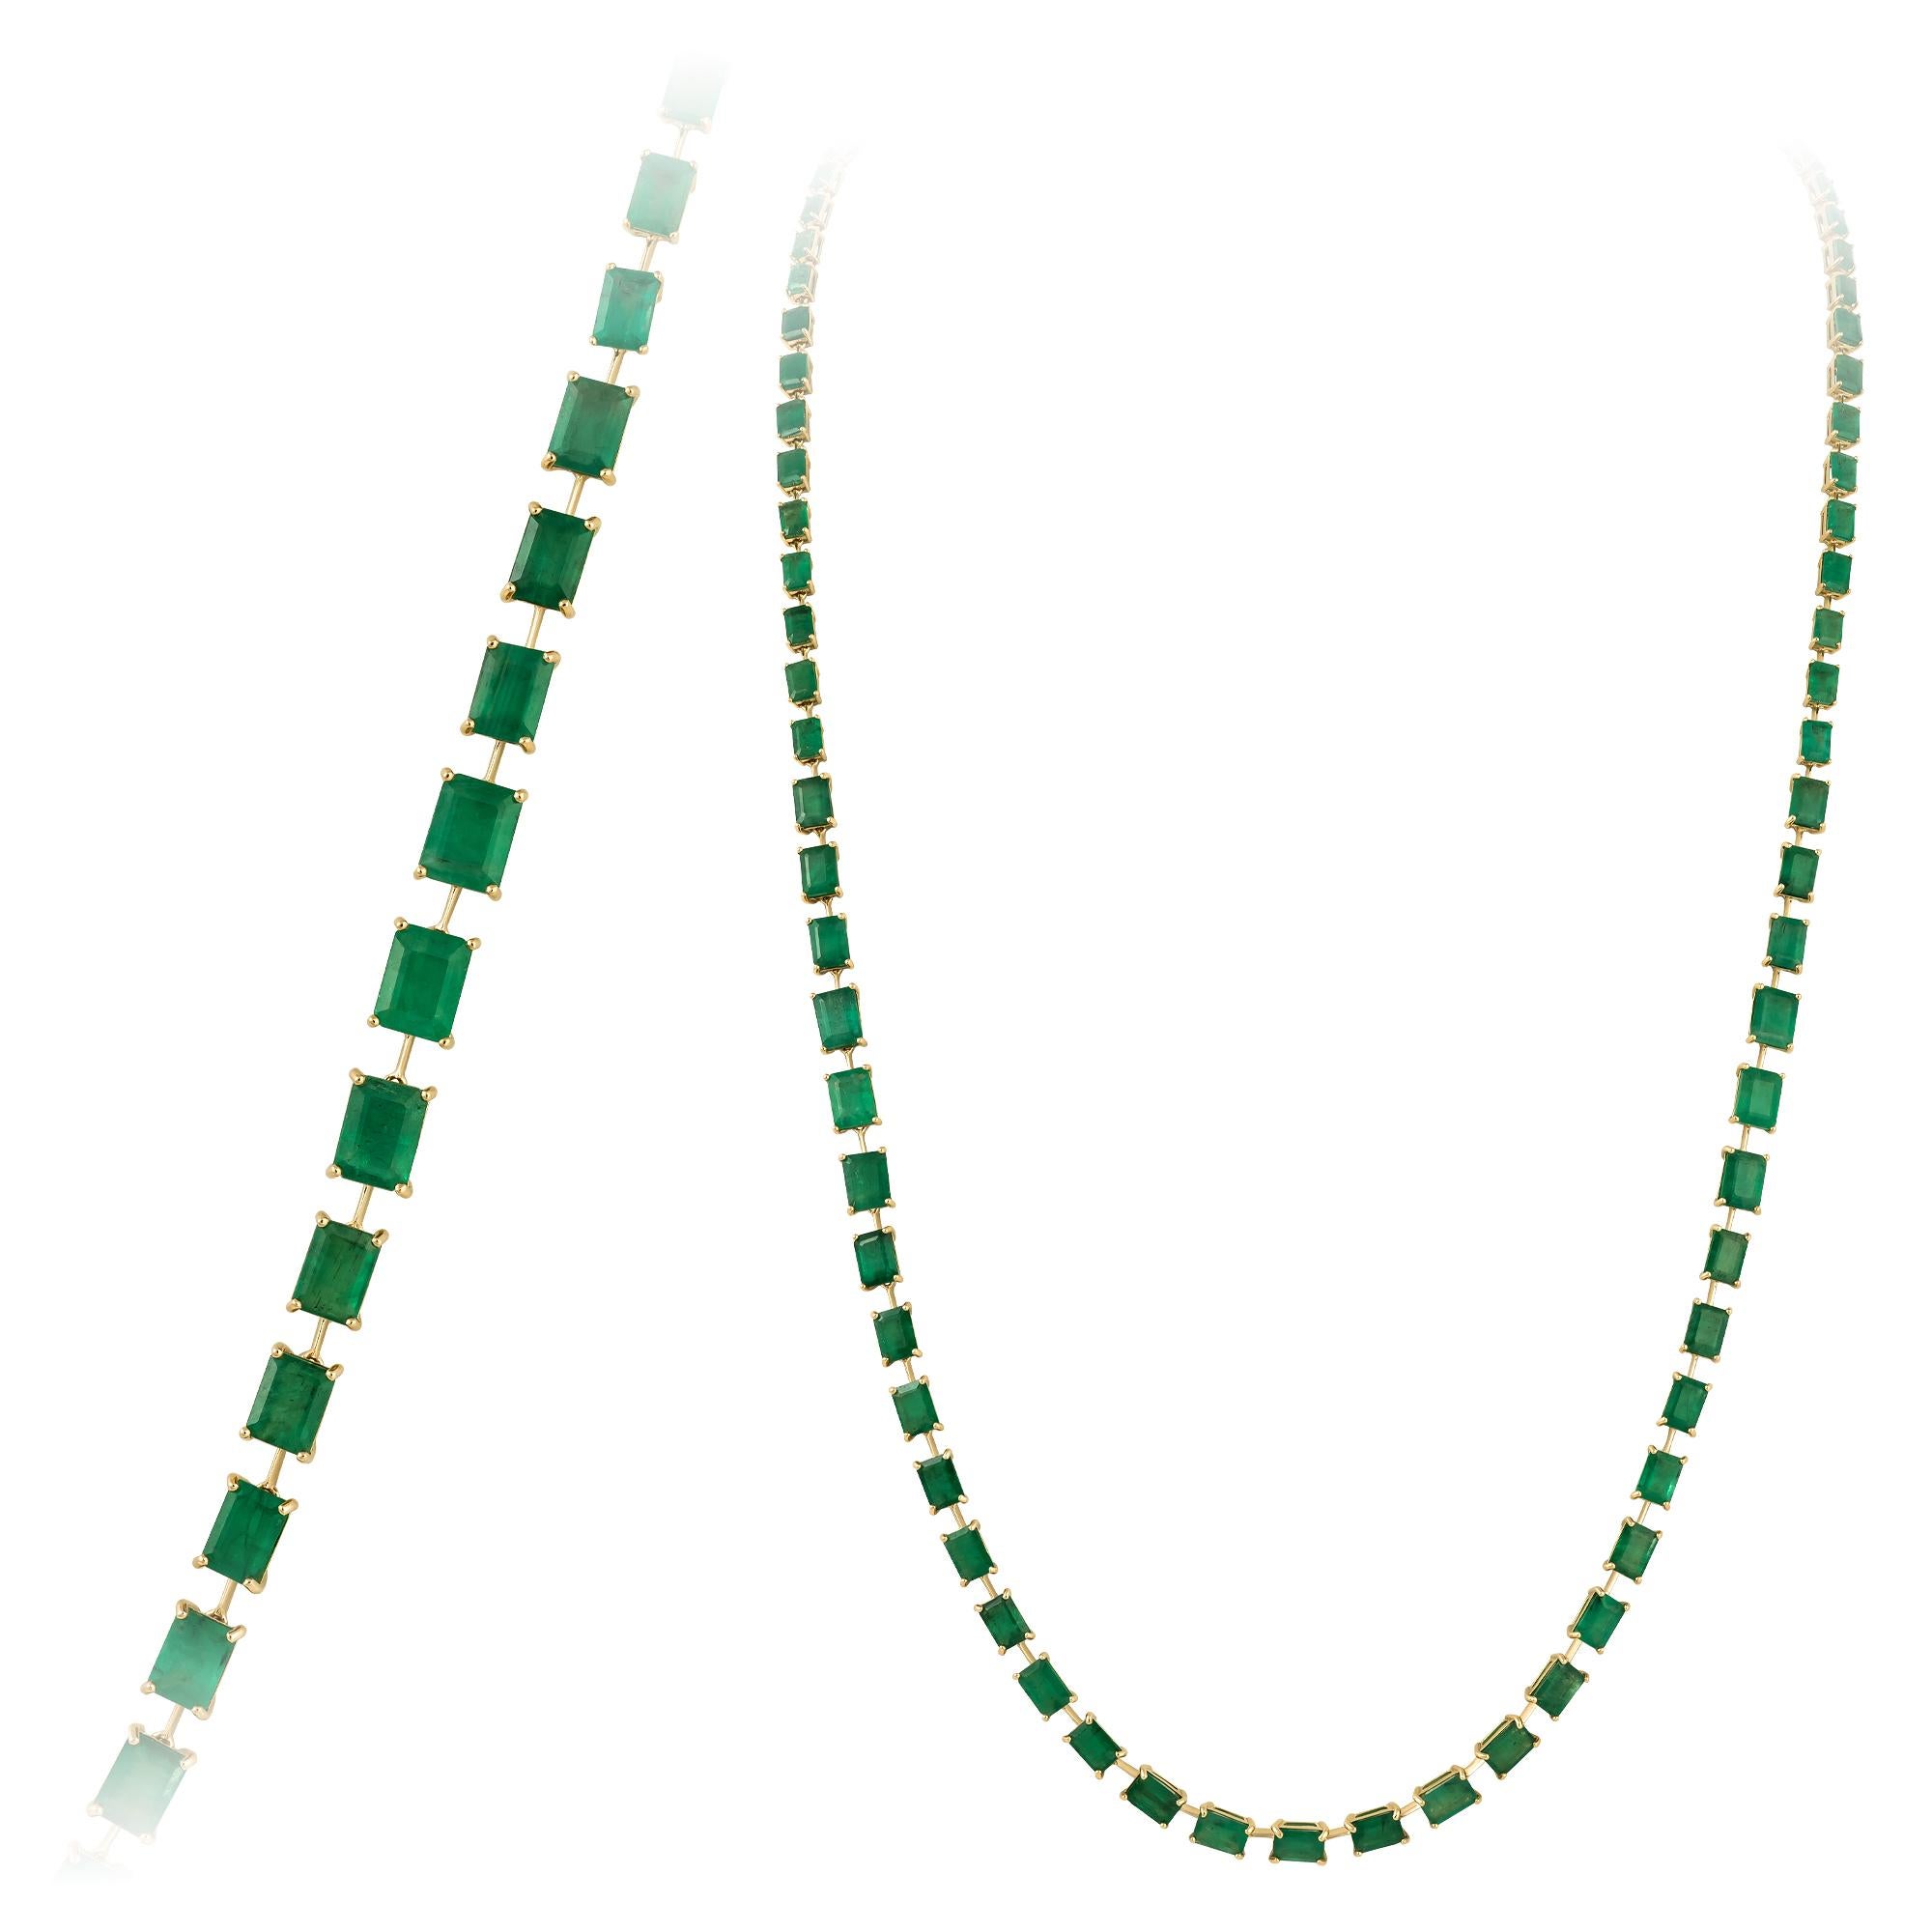 NECKLACE 18K Yellow Gold Emerald 52.14 Cts/85 Pcs
